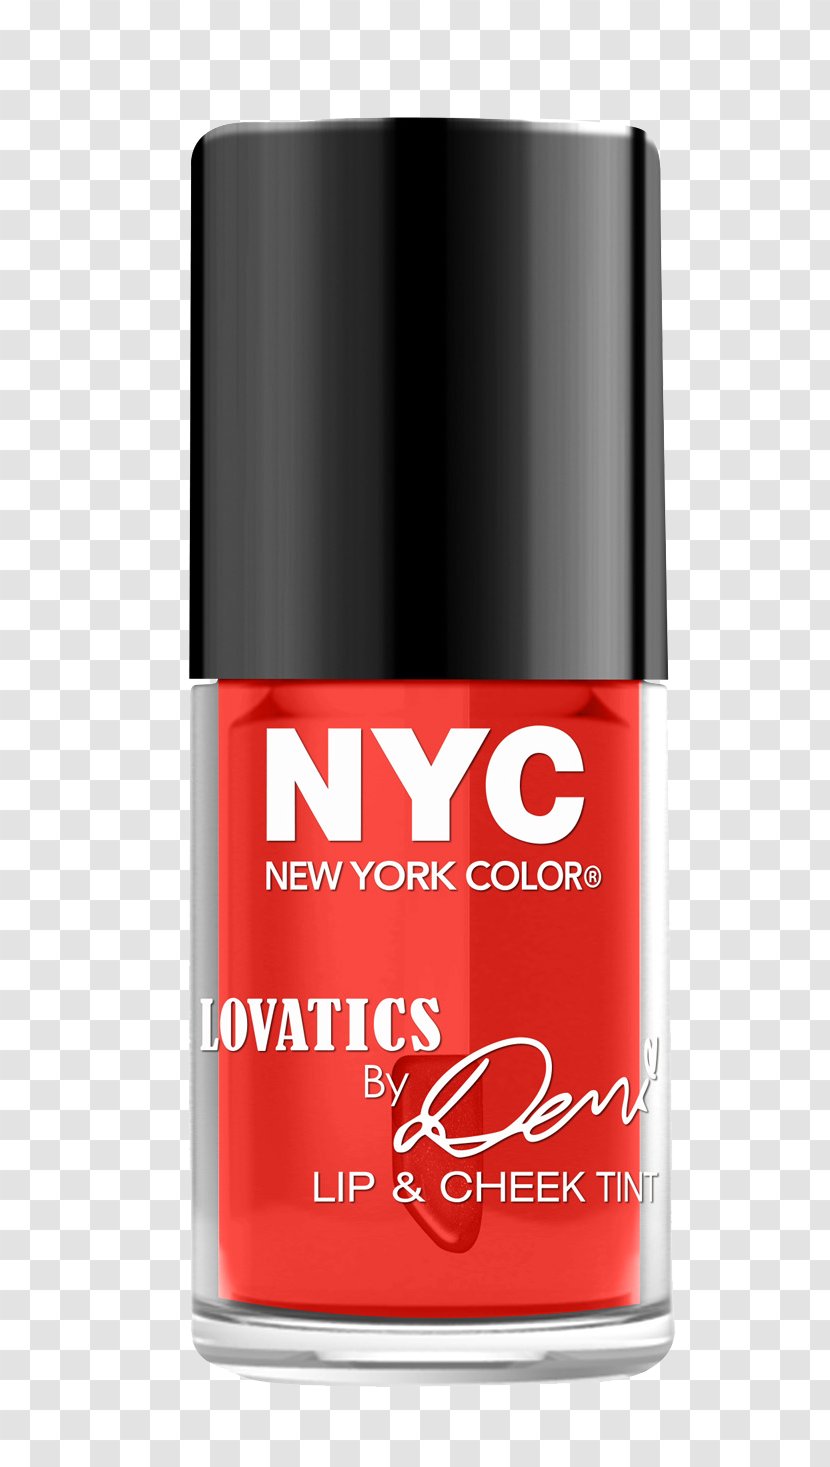 NYC Lovatics By Demi Eyeshadow Palette New York City Tints And Shades Lip Stain Color - Nail Care - Cheek Transparent PNG